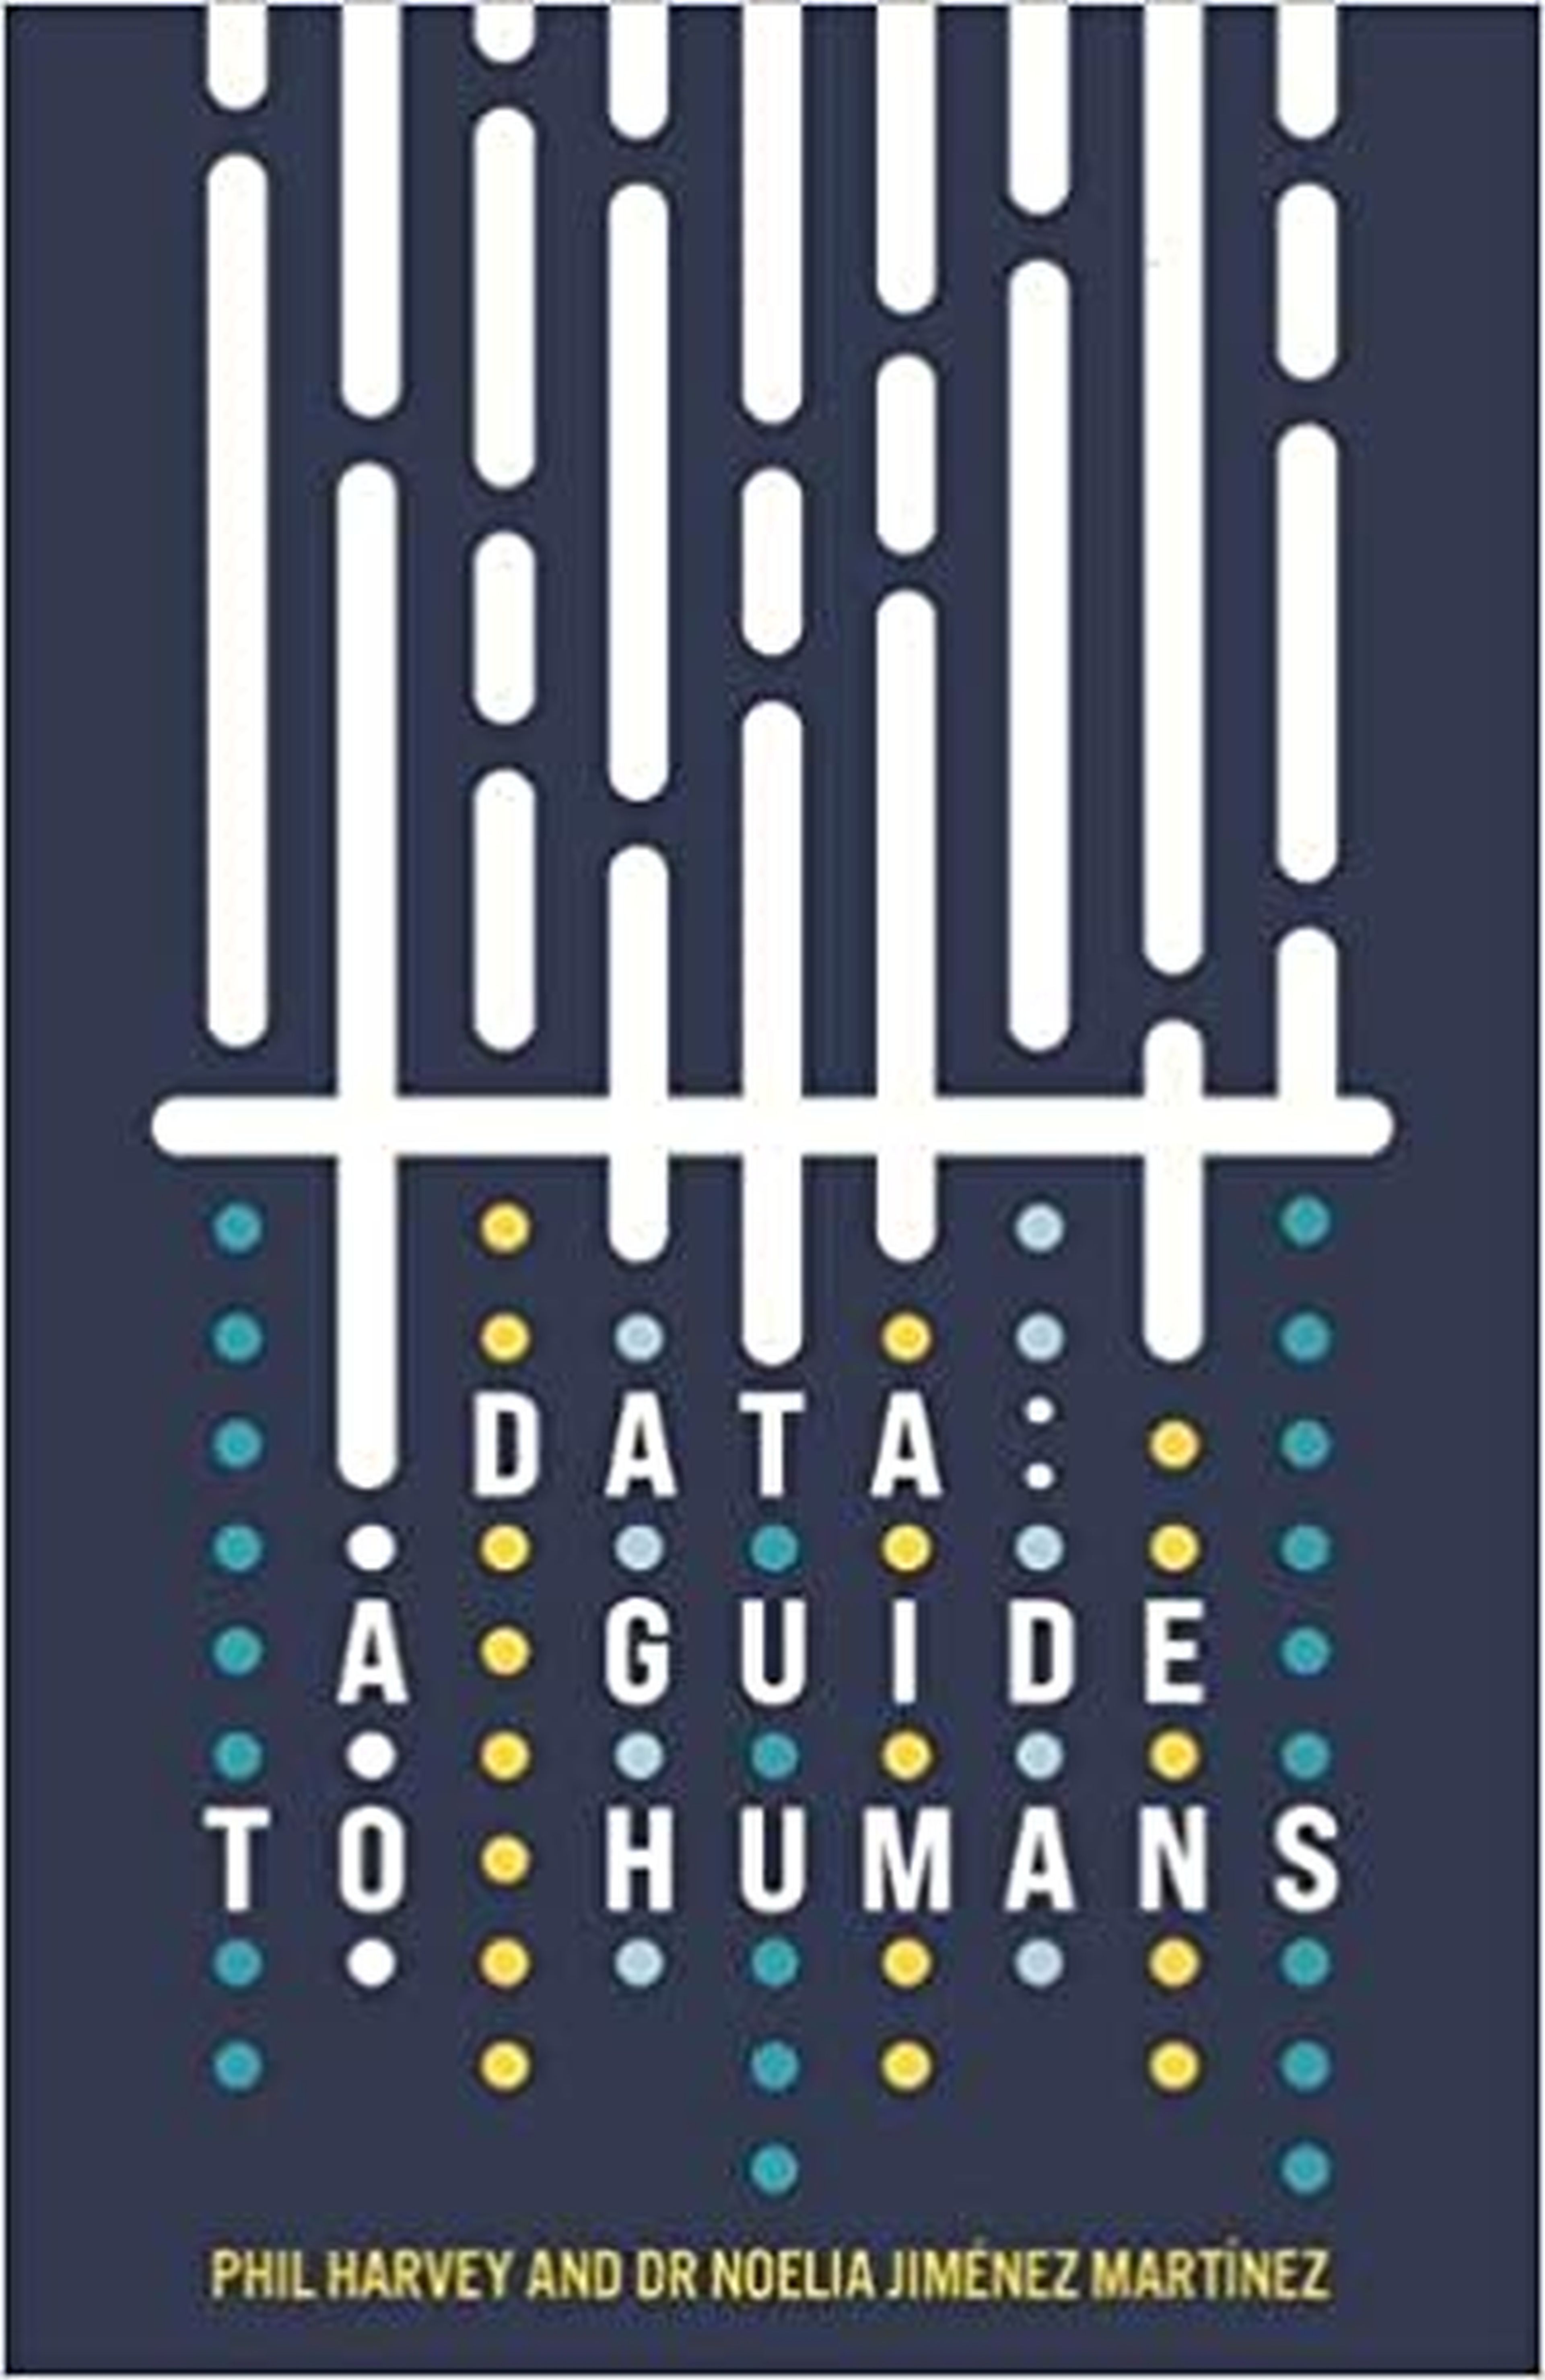 'Data: A Guide to Humans'